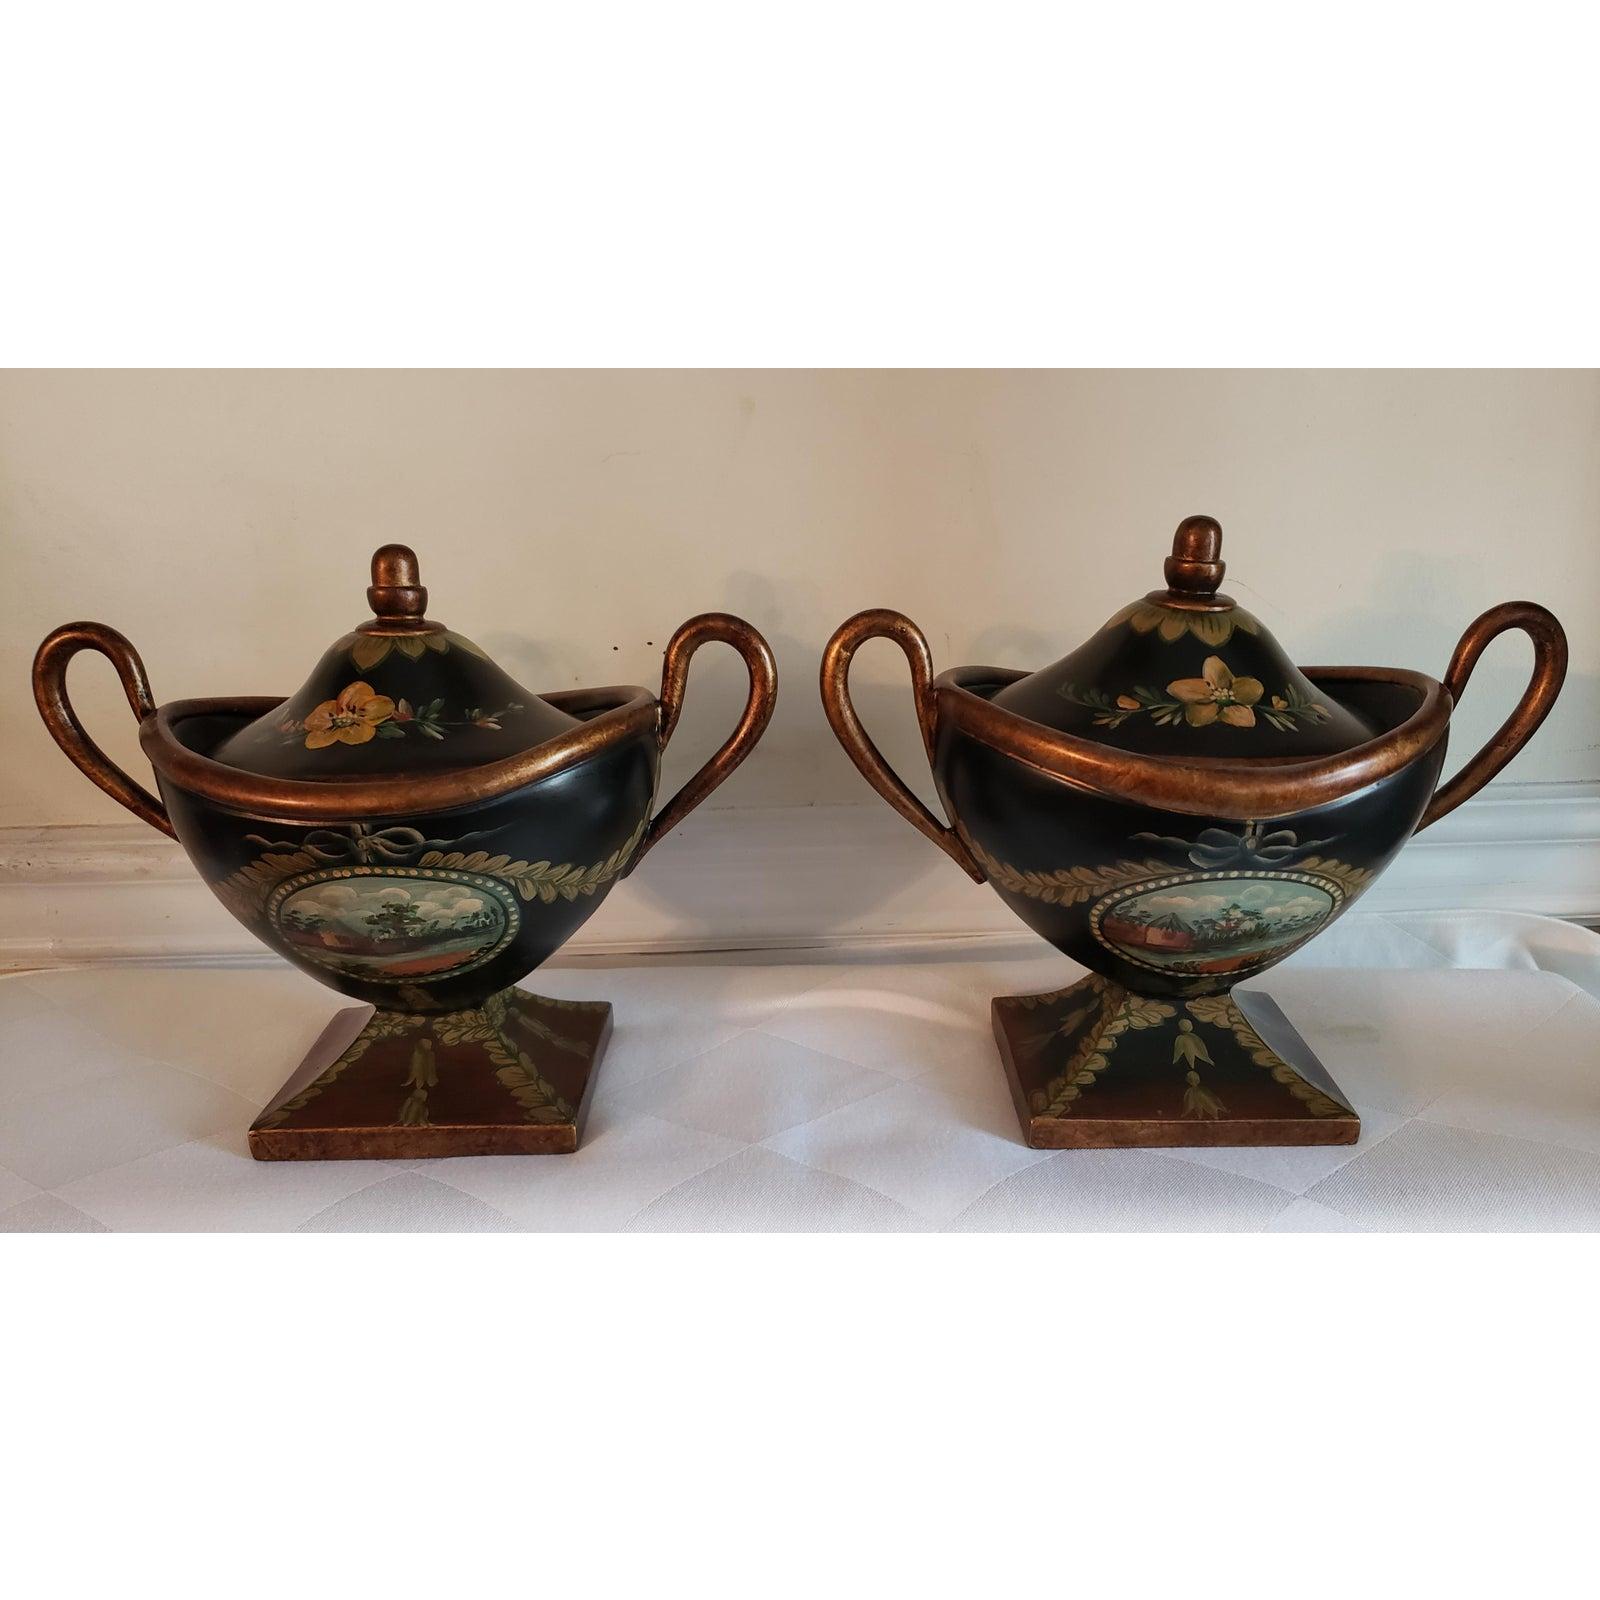 Vintage Japanese hand painted decorative ceramic urns. Urns measure 10.5inches in width by 6.5 inches in depth and 9 inches tall.
  